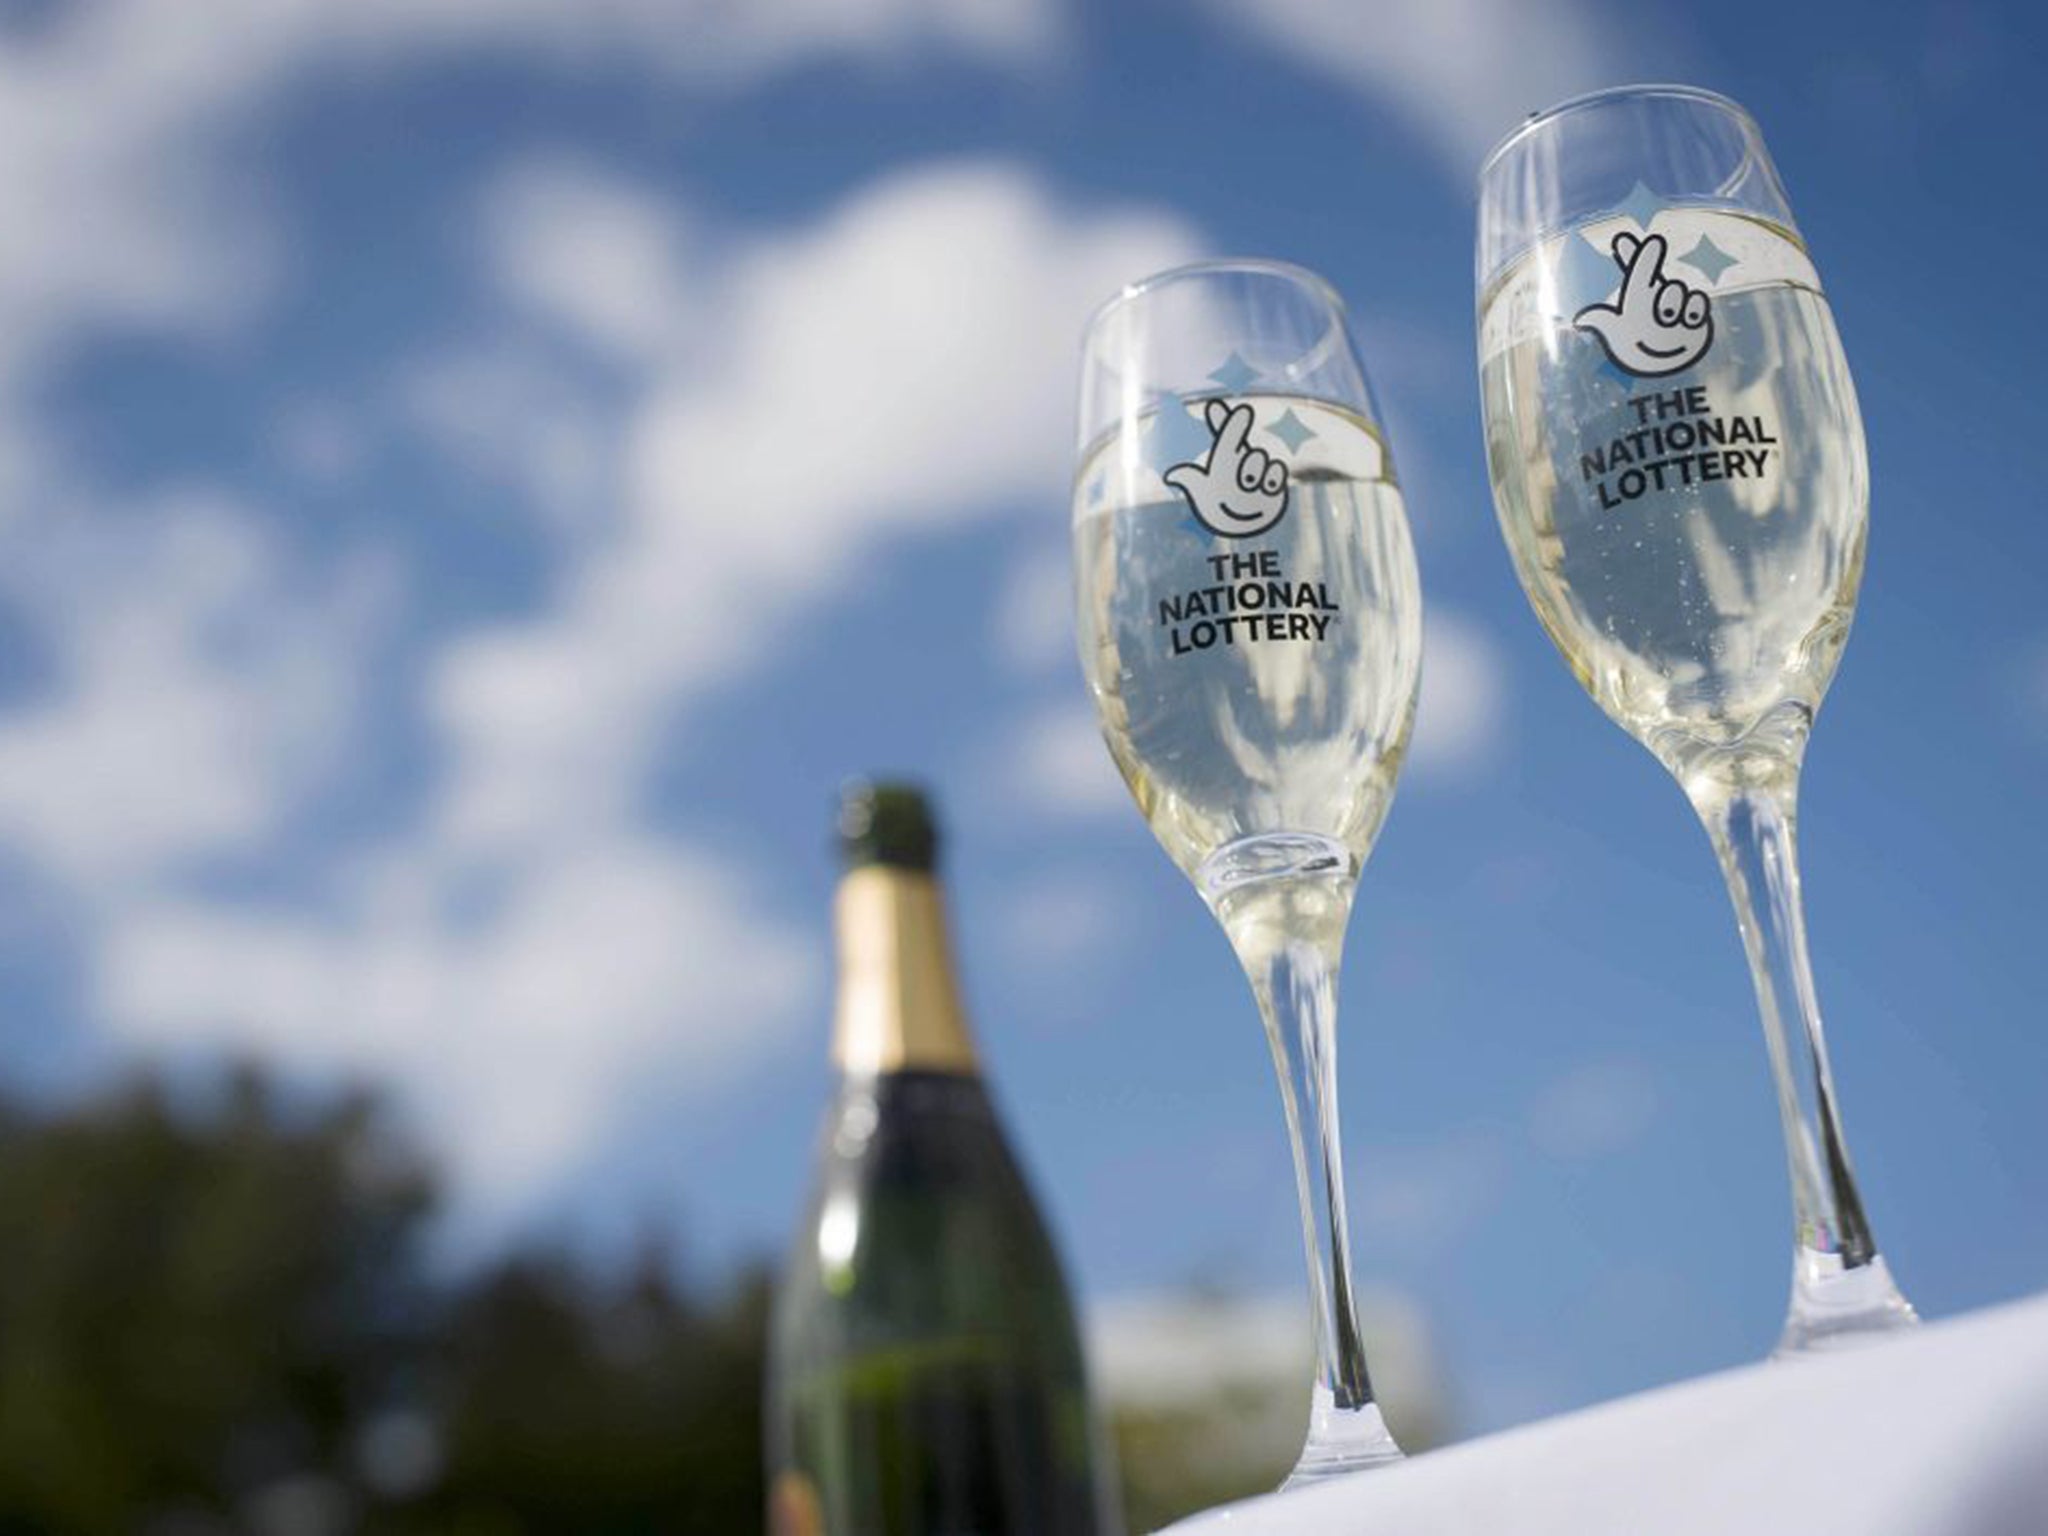 The couple have won £33m after the historic draw